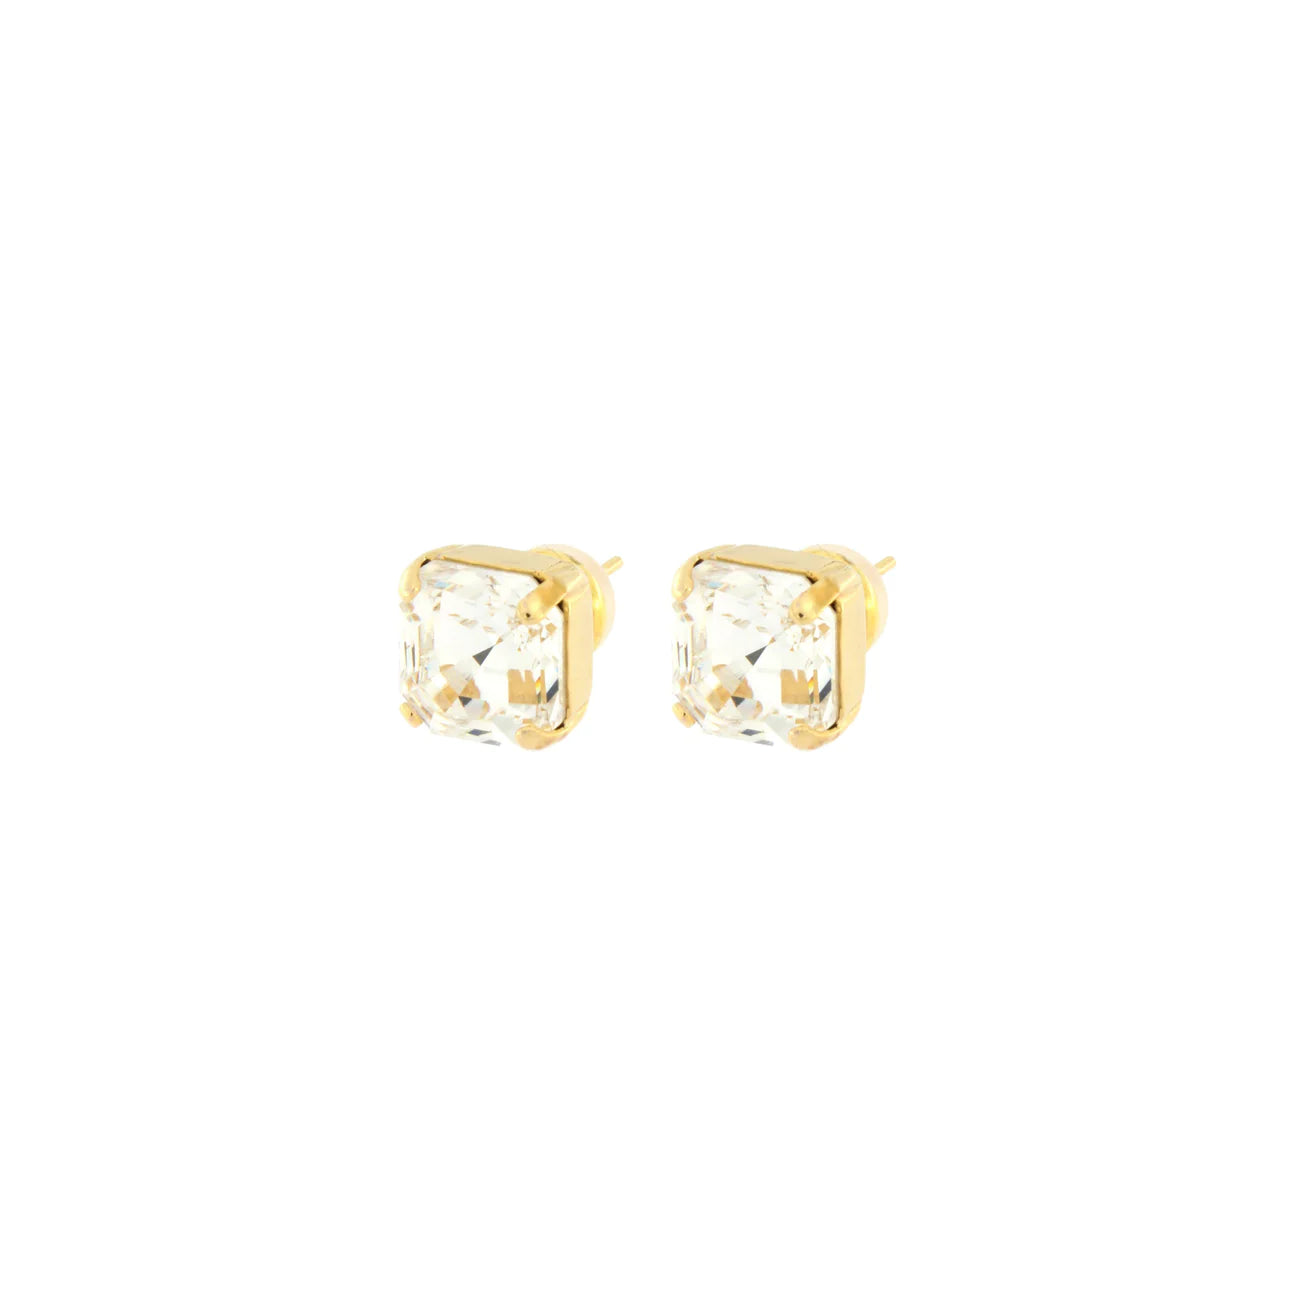 'Ella Bartlow' Hip to be square studs